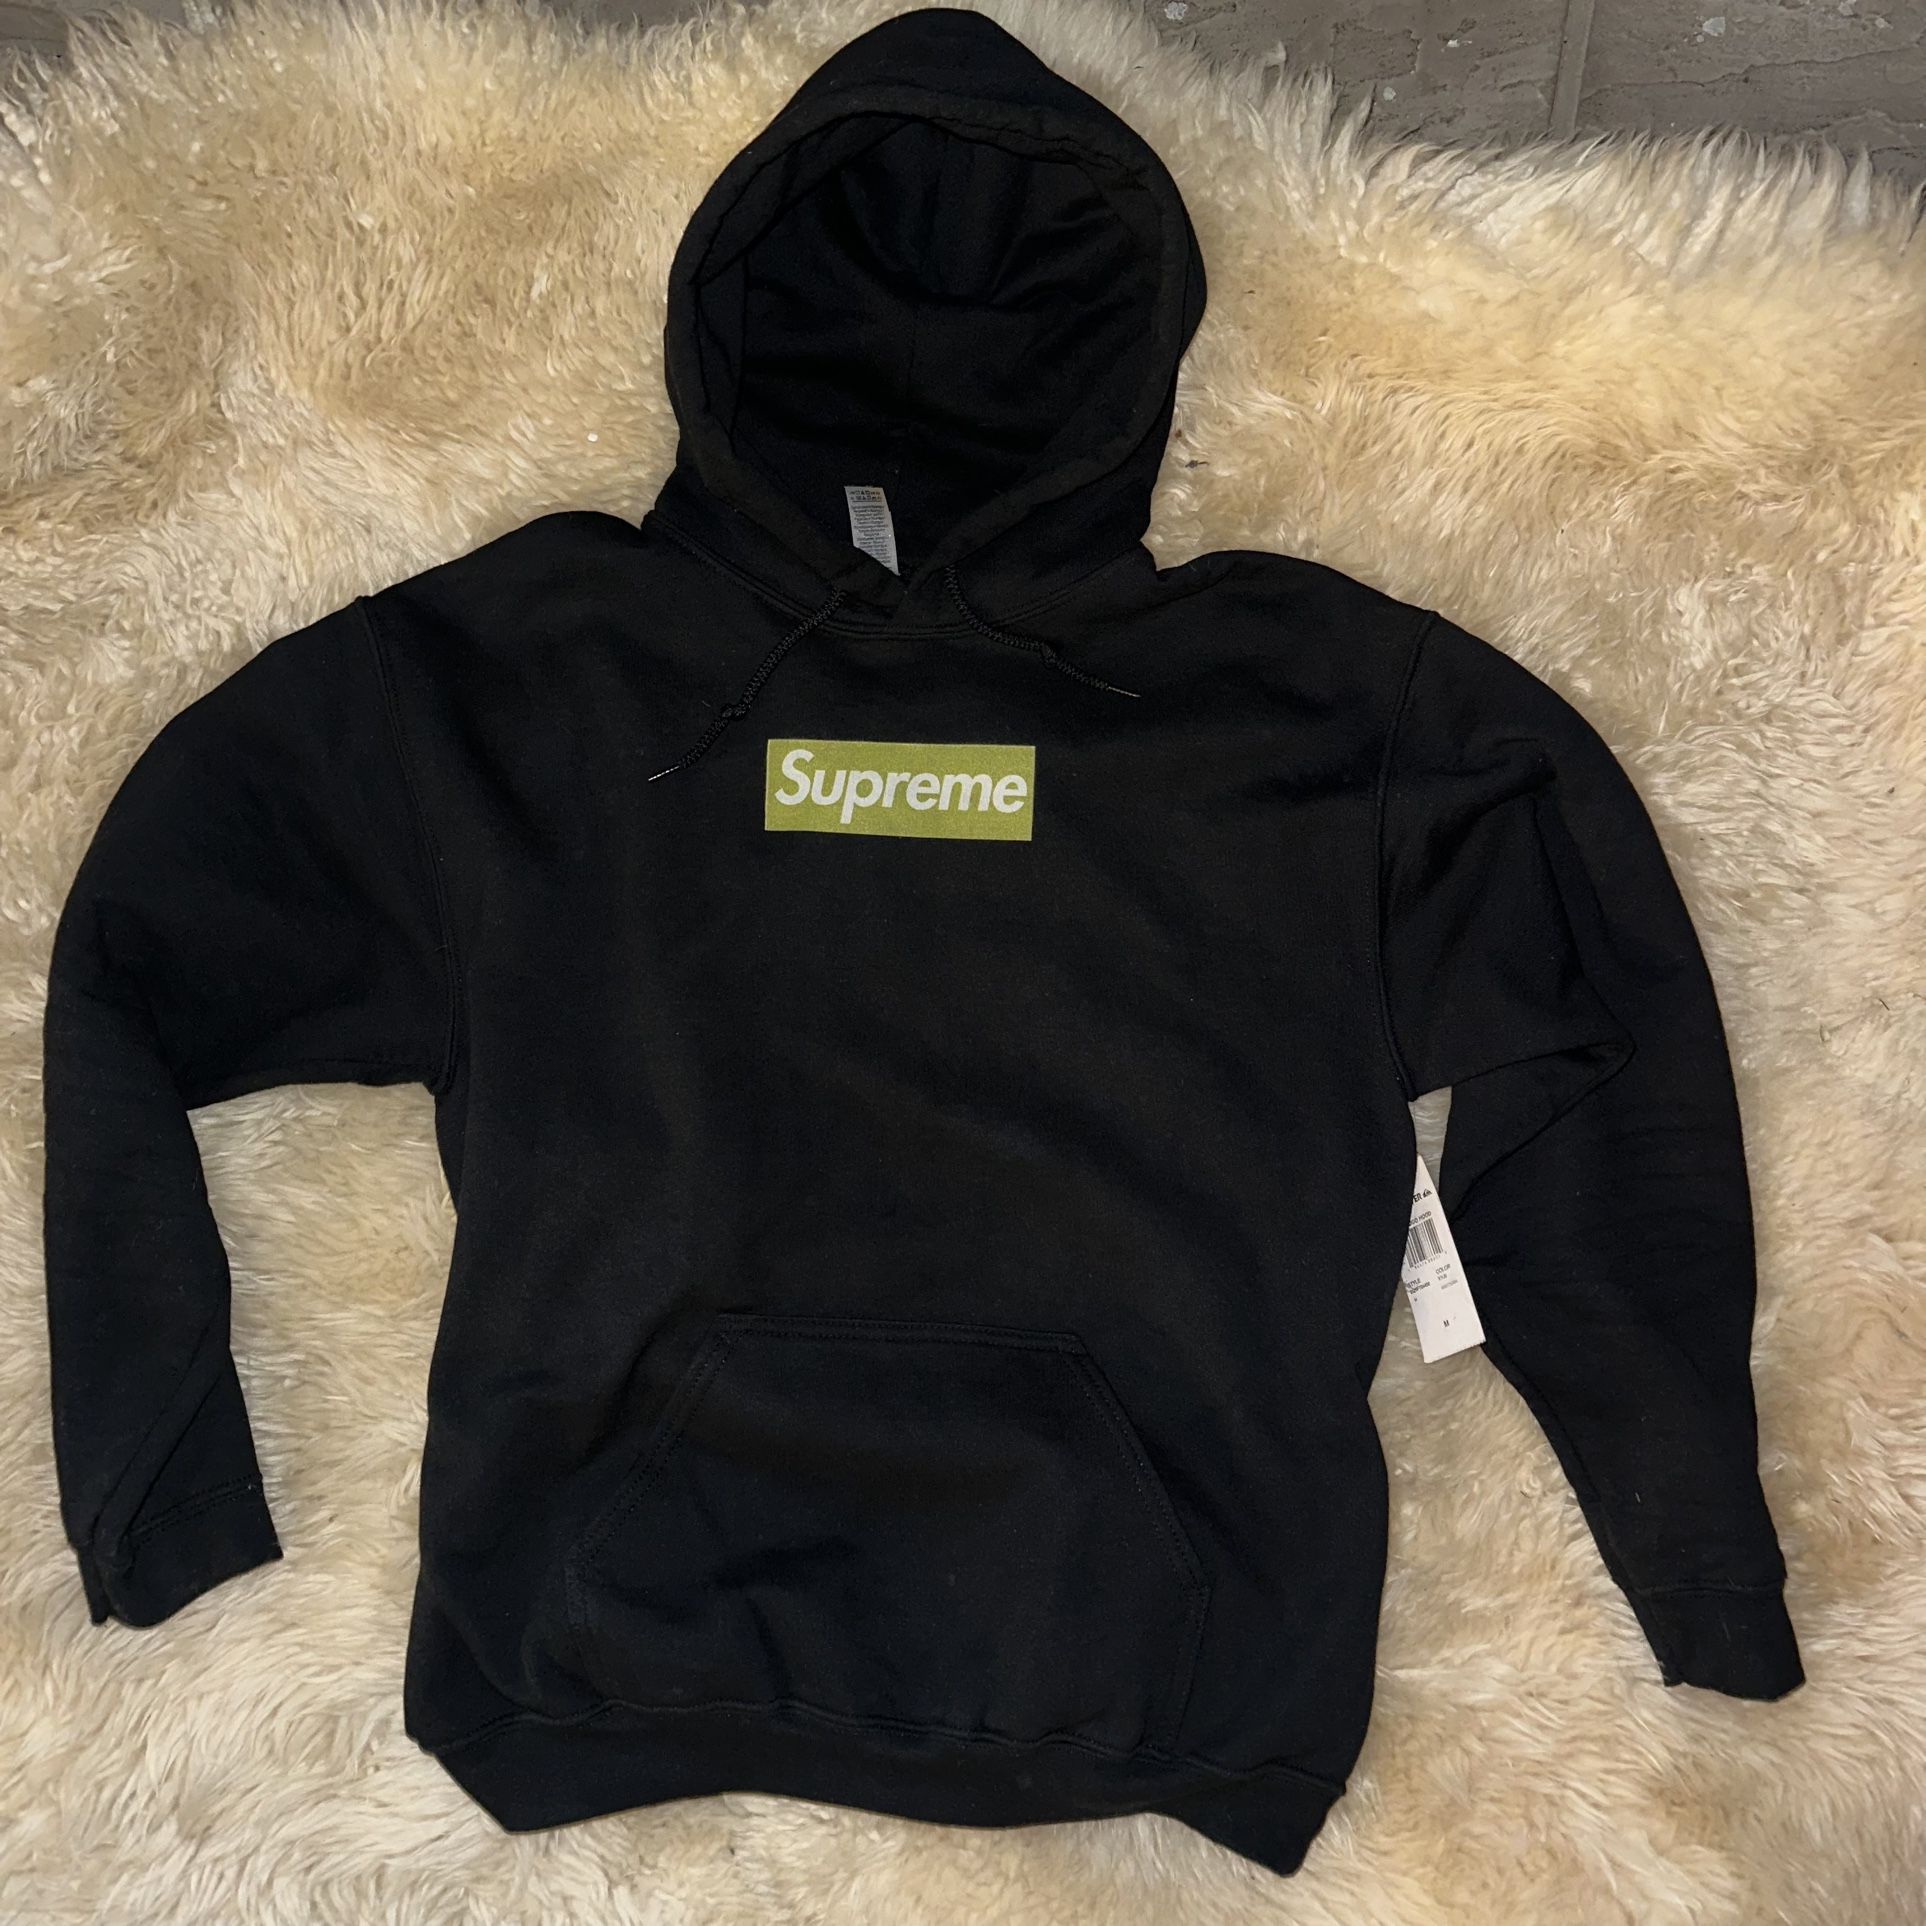 Supreme Logo Hoodie From Quicksilver 